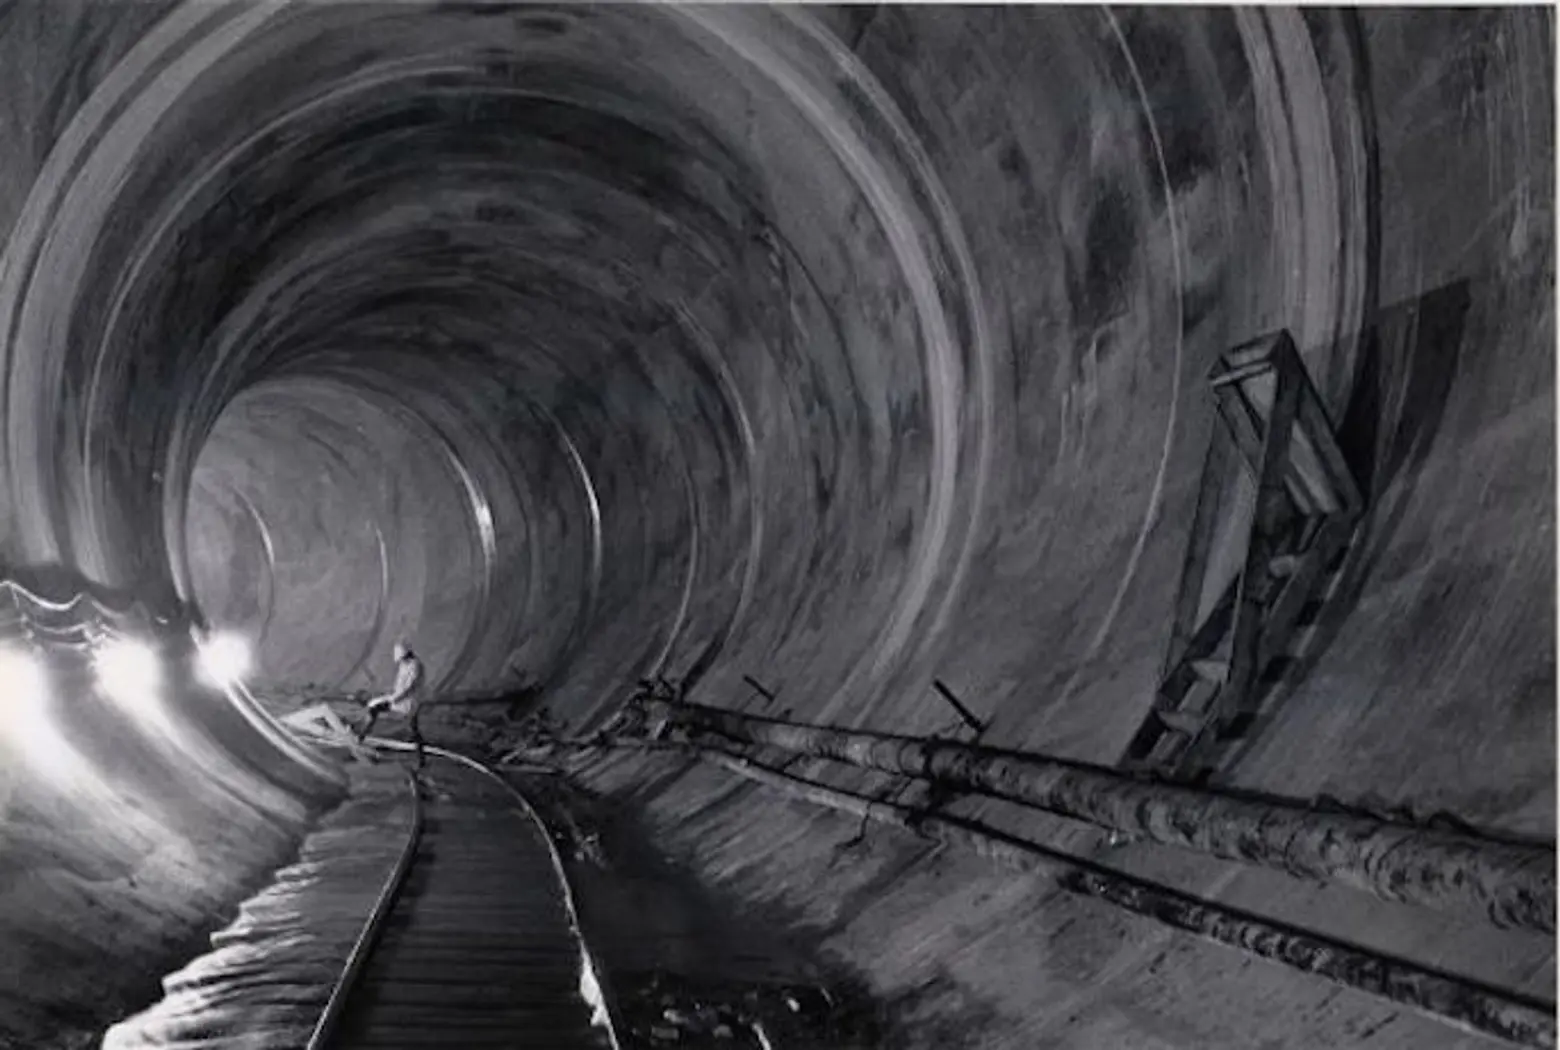 De Blasio to allocate $300 million and accelerate construction of third NYC water tunnel